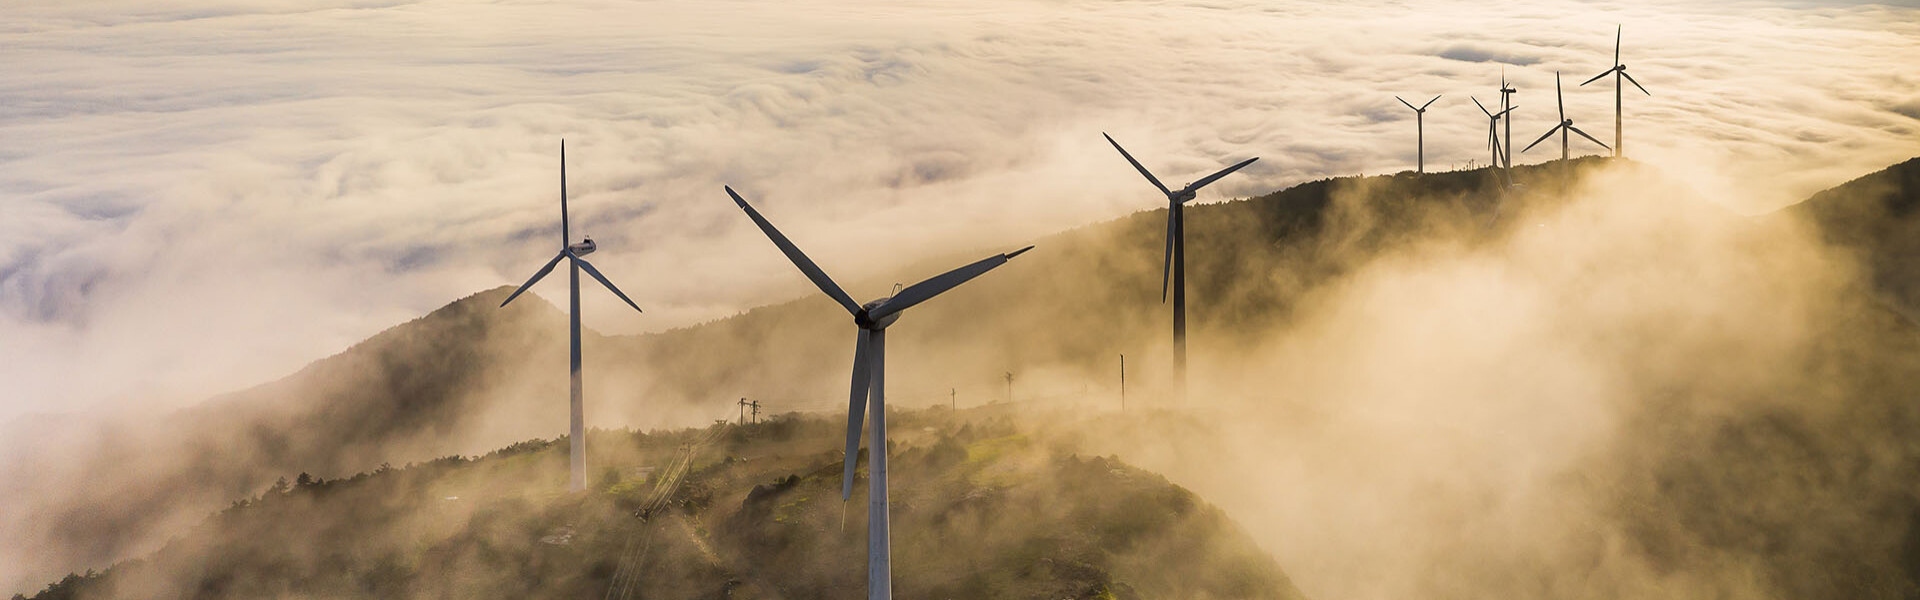 Private Equity and Renewable Energy: How Investors Can Set Themselves Up for Digital Transformation Success